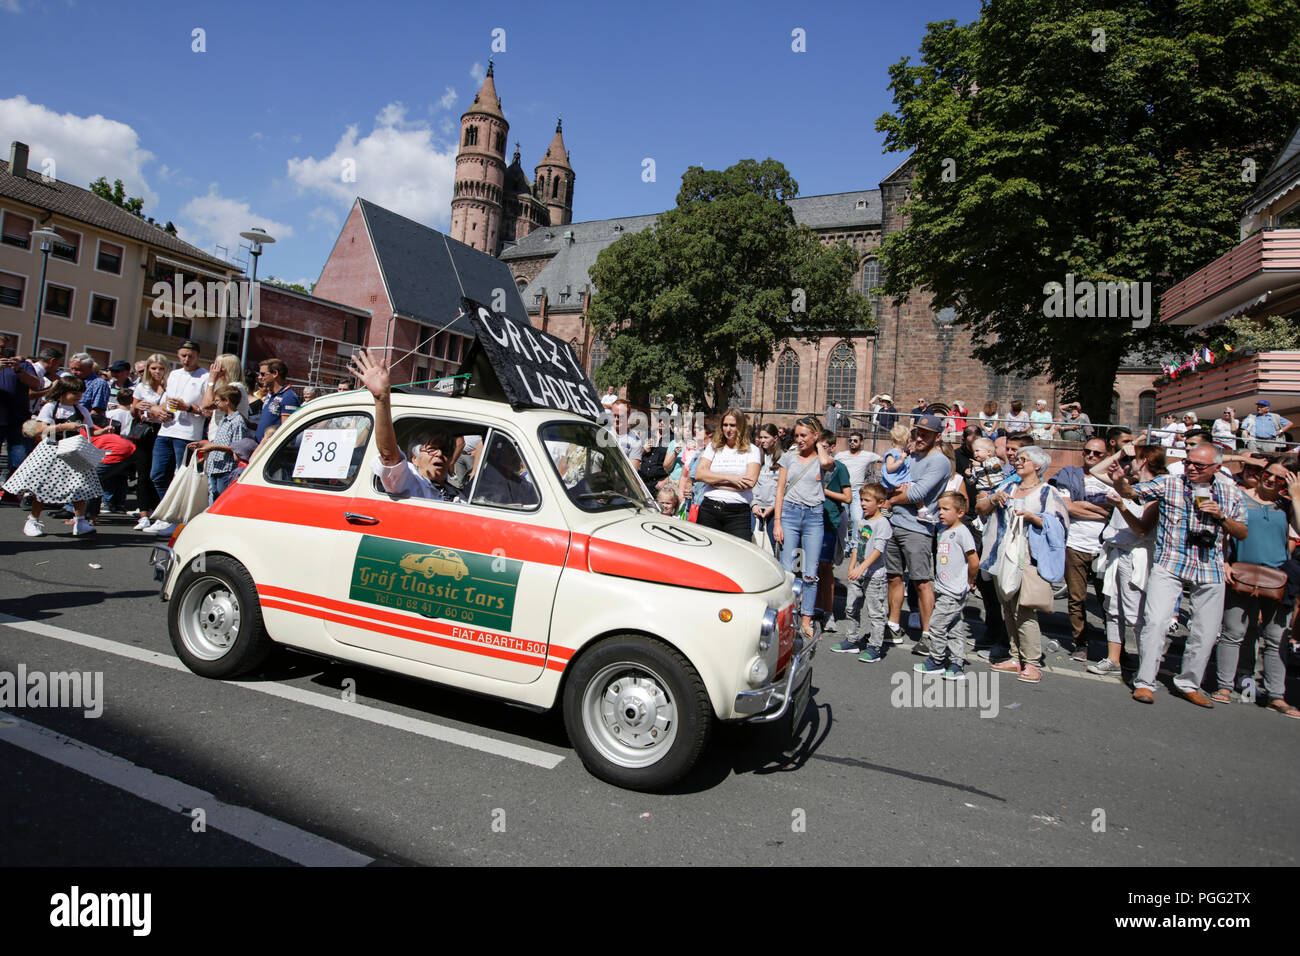 Worms, Germany. 26th August 2018. A Fiat Abarth 500 vintage car partakes in the parade. The first highlight of the 2018 Backfischfest was the big parade through the city of Worms with over 70 groups and floats. Community groups, music groups and businesses from Worms and further afield took part. Credit: Michael Debets/Alamy Live News Stock Photo